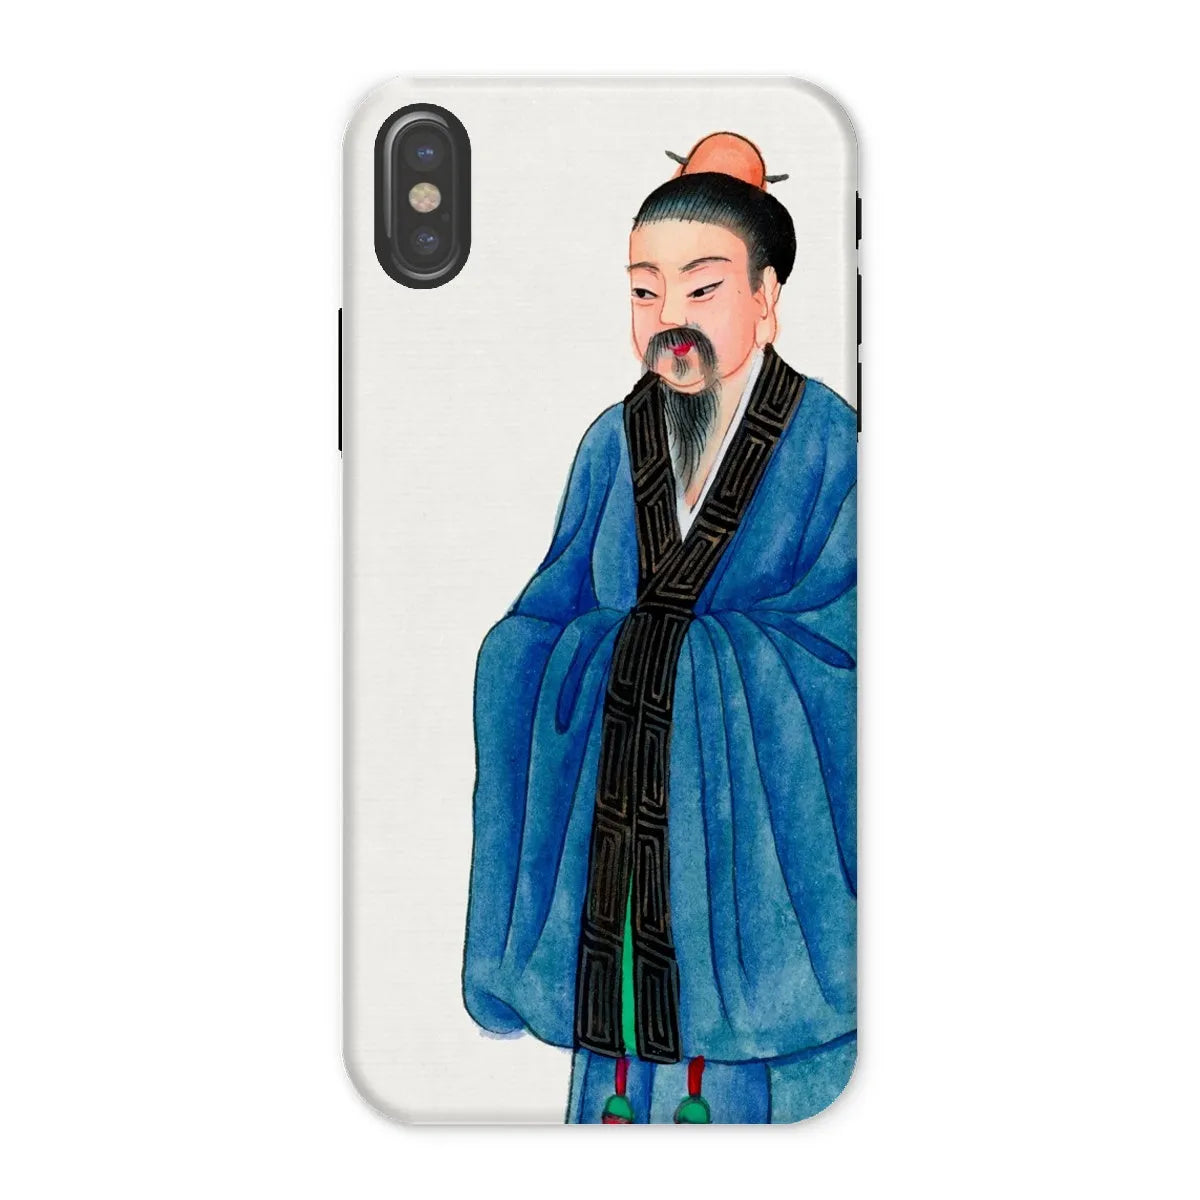 Grand Master - Chinese Buddhist Aesthetic Art Phone Case - Iphone x / Matte - Mobile Phone Cases - Aesthetic Art